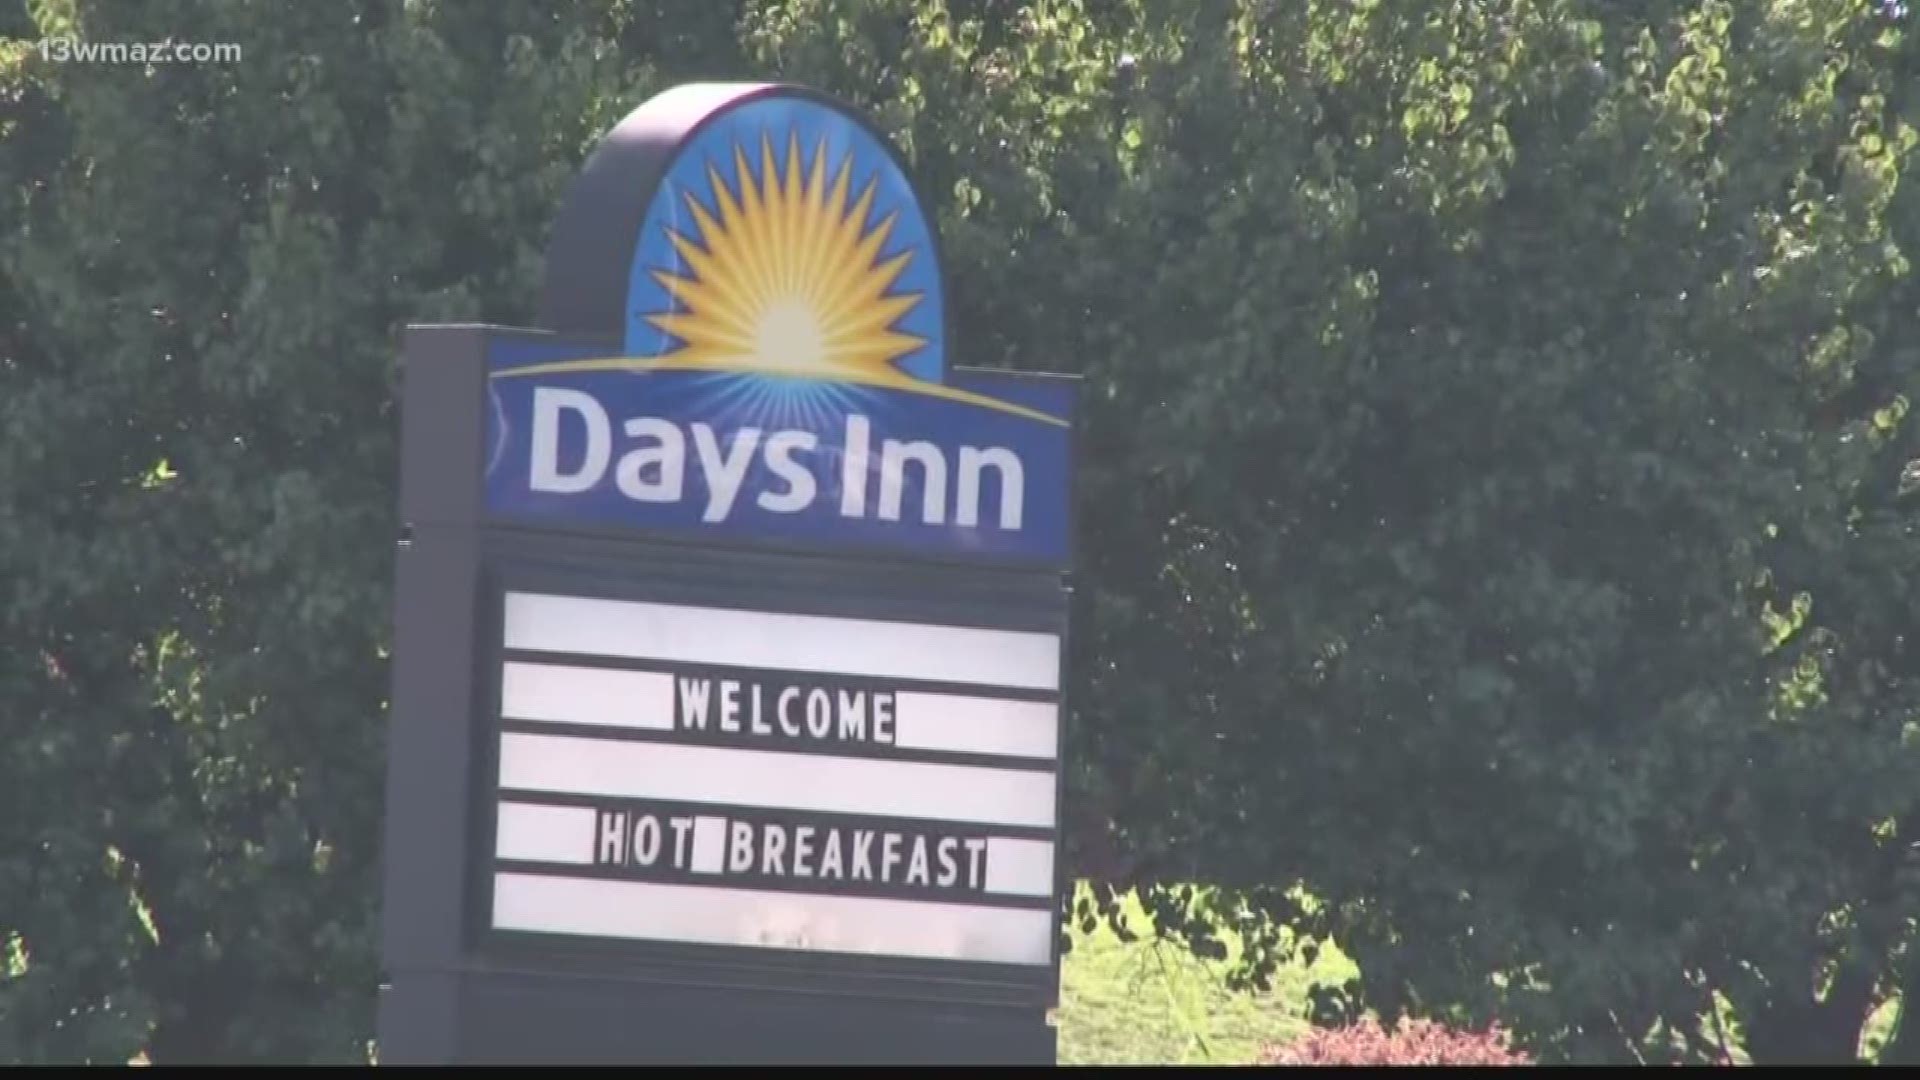 If you have family heading north from Florida, hotels and motels across Central Georgia are preparing for people fleeing Hurricane Dorian. Abby Kousouris talked with some Dublin hotel owners about how they're handling evacuations.